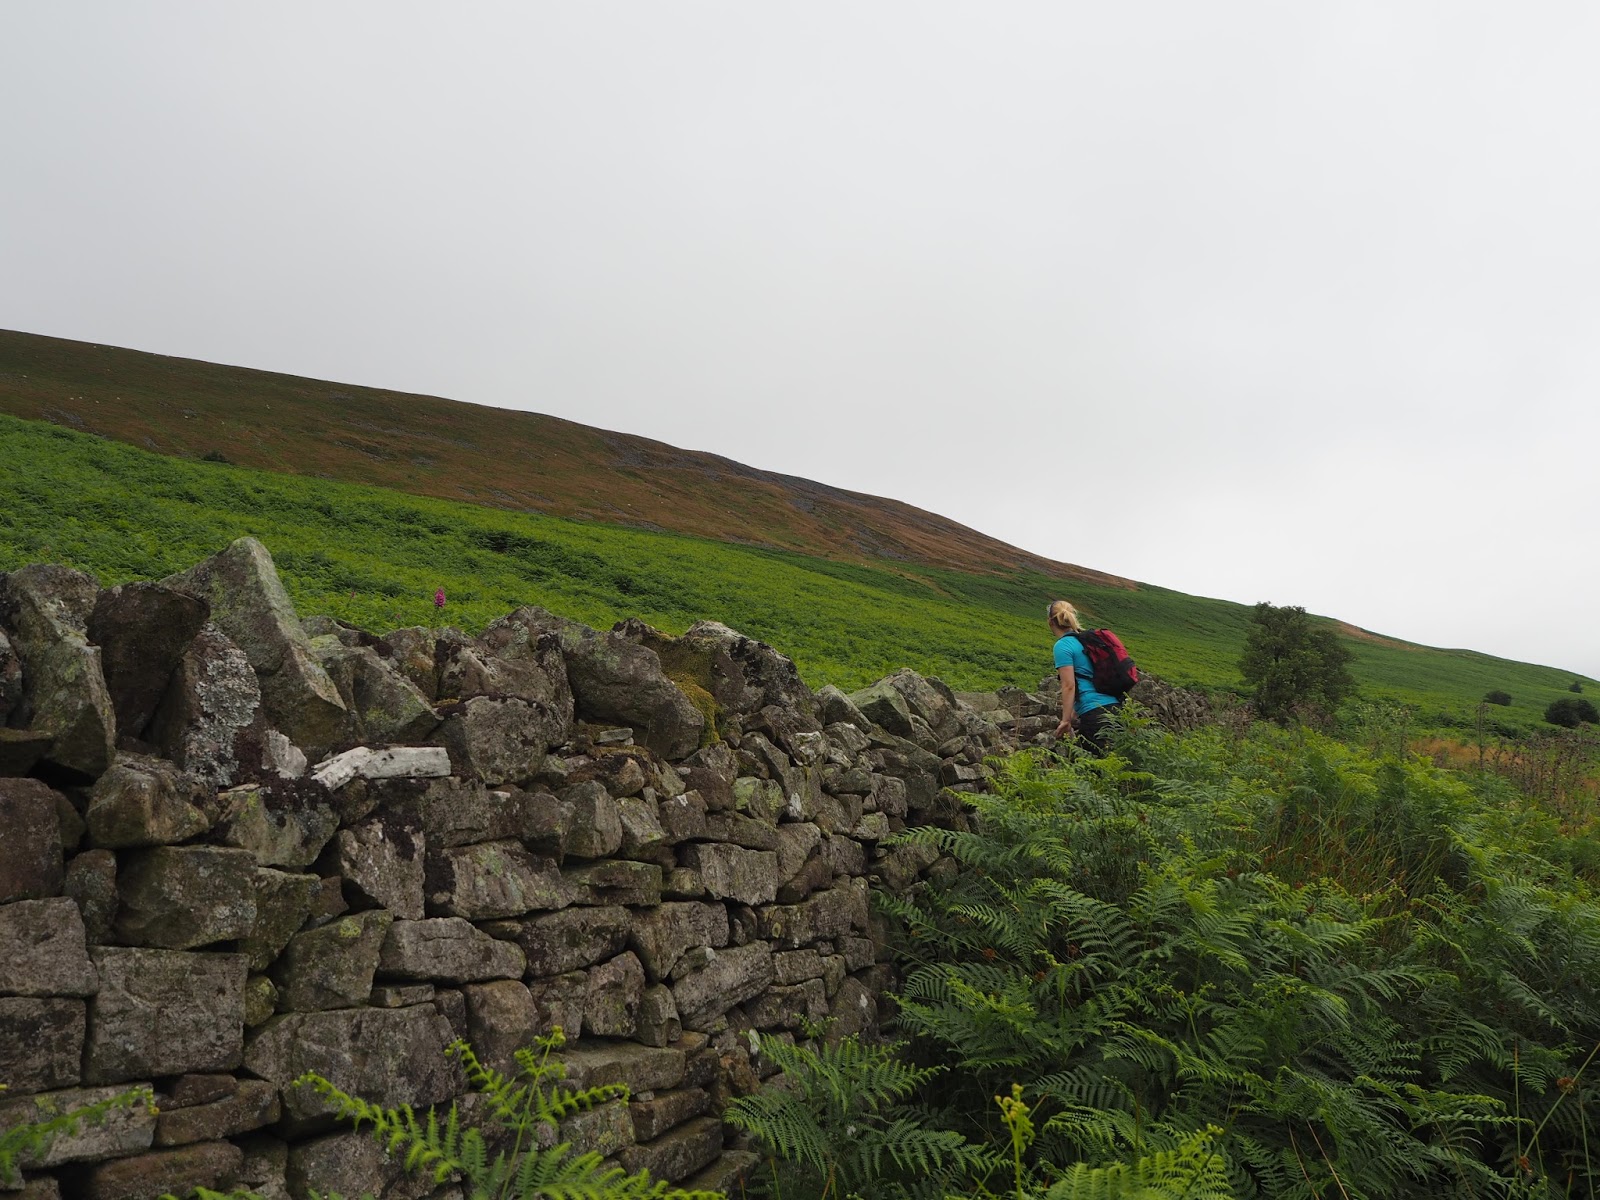 A weekend in the Brecon Beacons, Wales